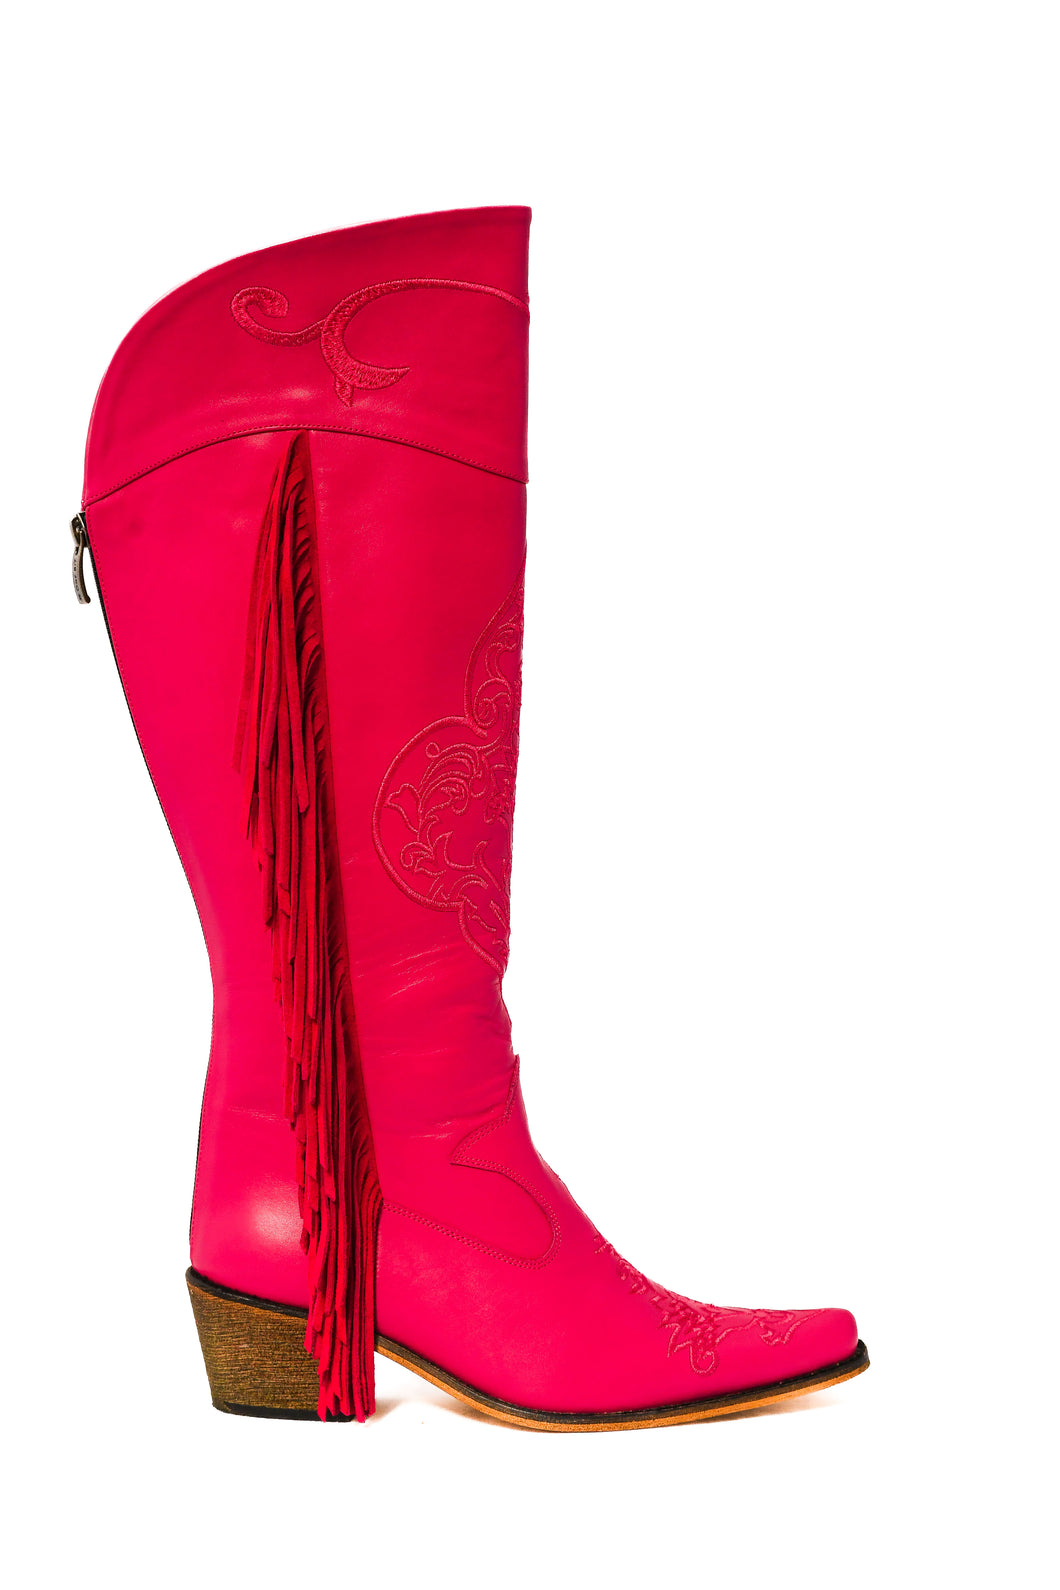 Pink Embroidered Fringe Tall Cowboy